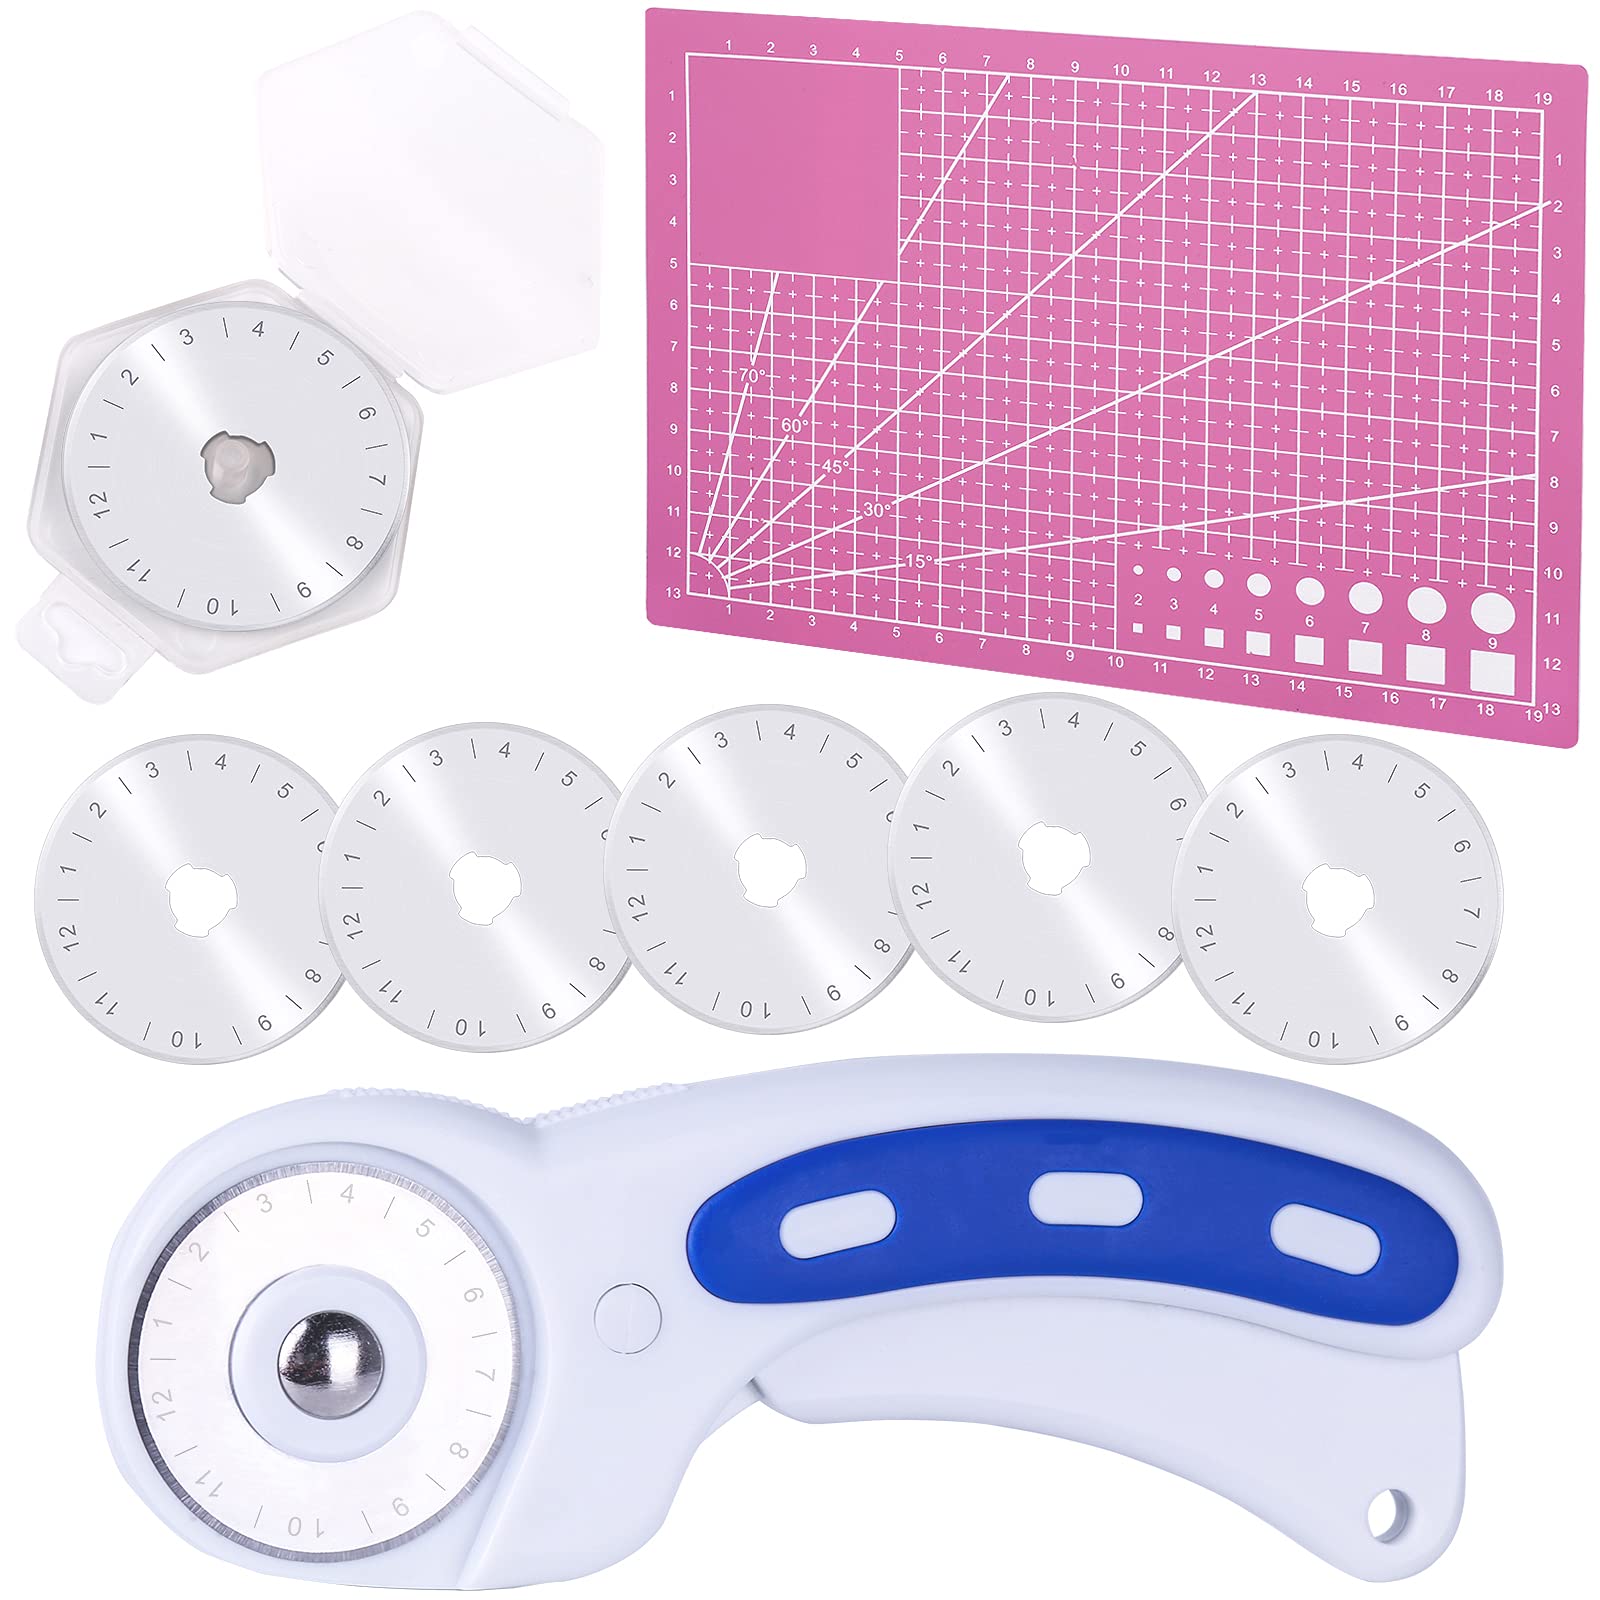 Sewing Rotary Cutter 45 mm Rotary Cutter Blades Quilting Rotary Cutter and  Rotary Blades for Quilting Scrapbooking Sewing DIY C